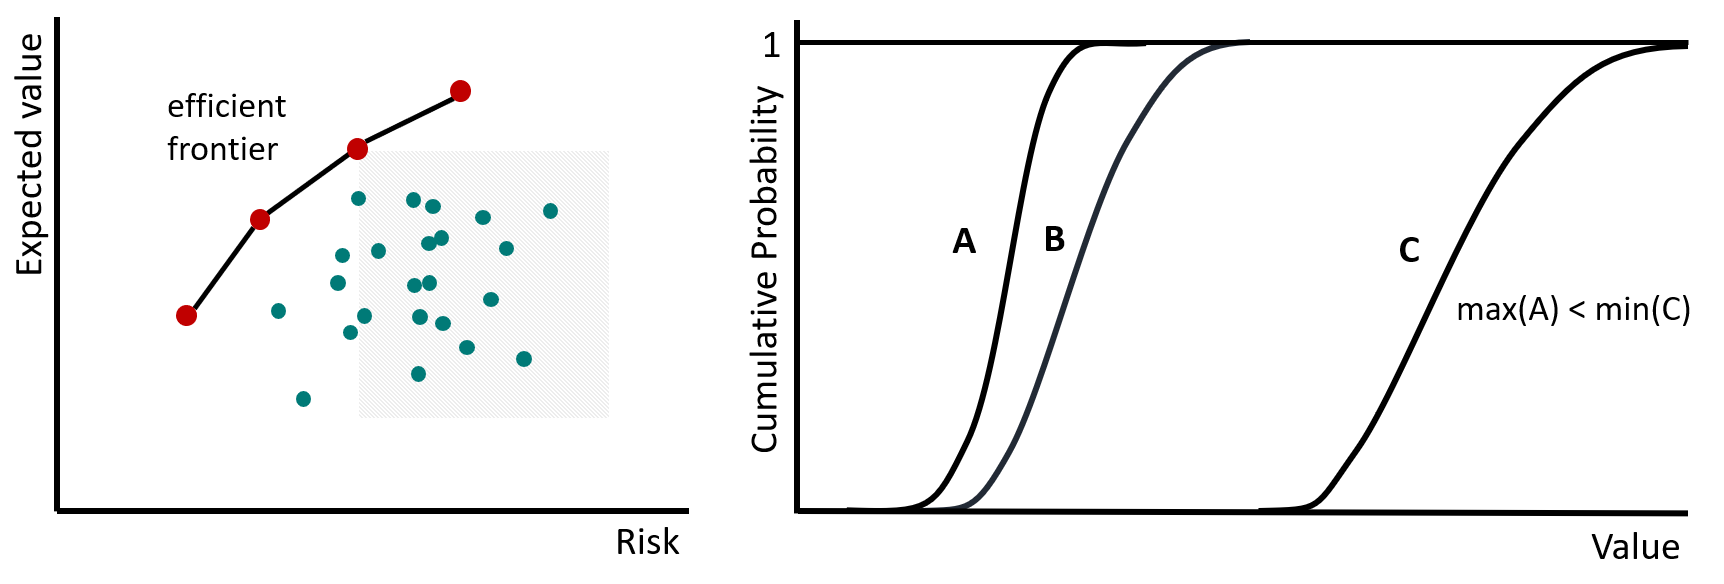 Mean-variance criterion (left) and dominance (right).